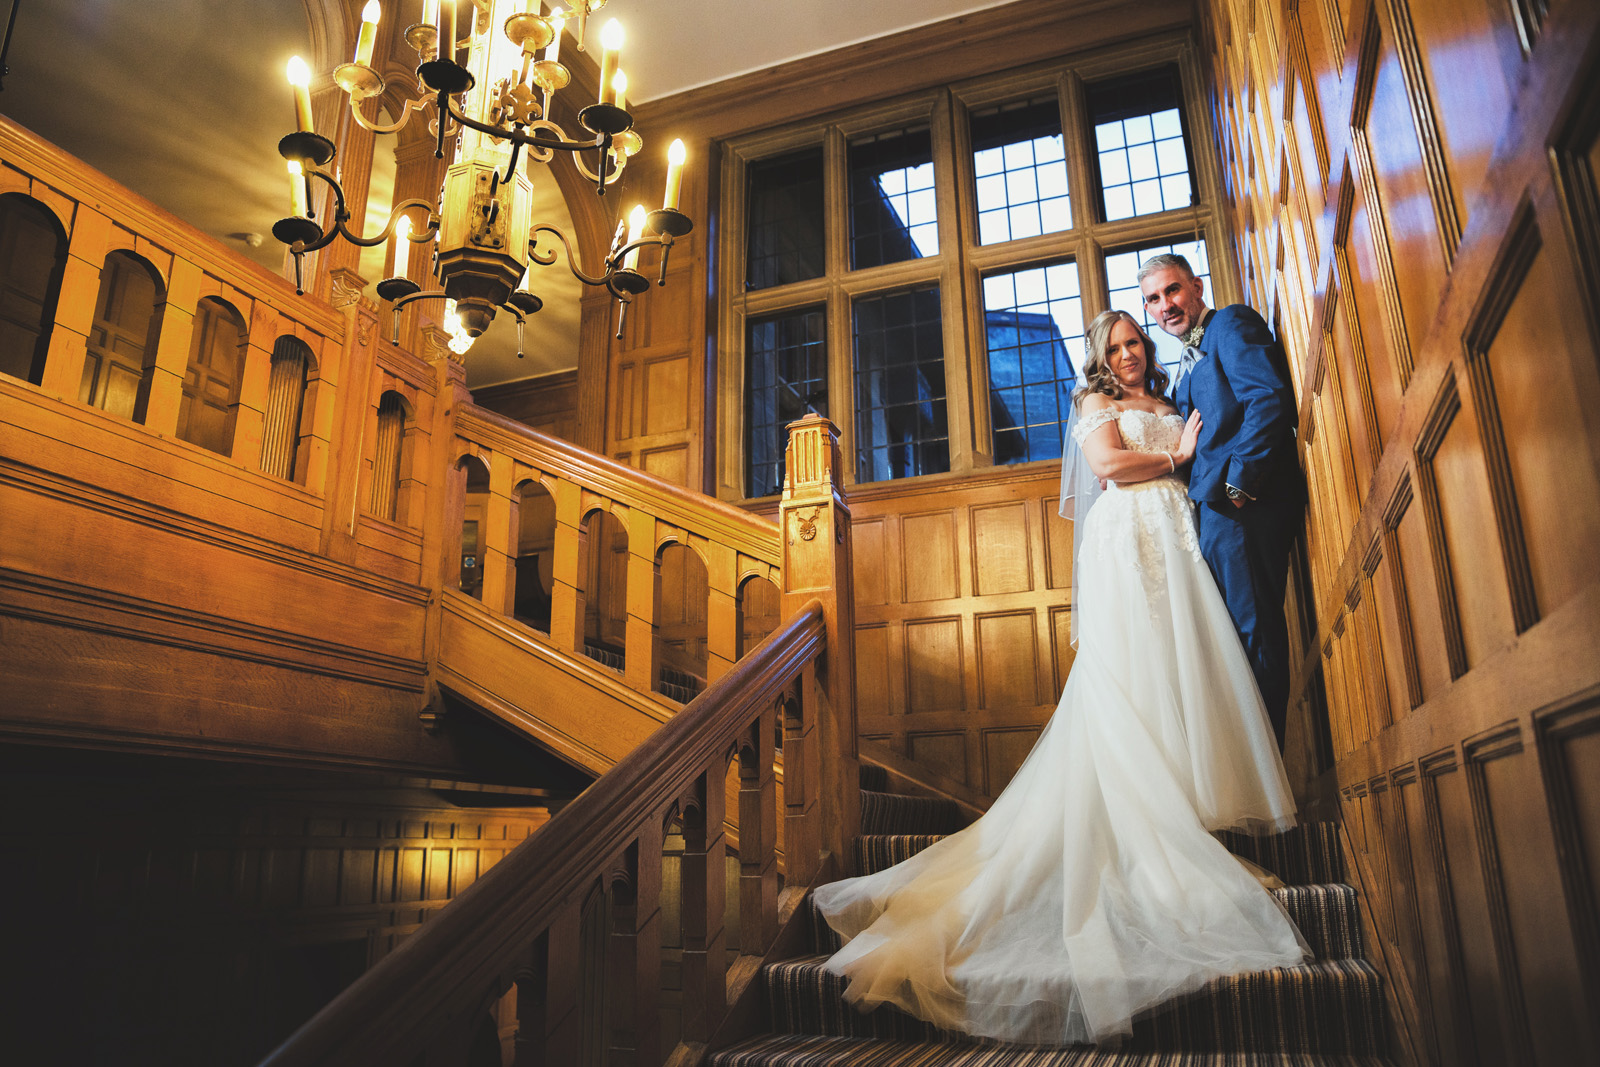 Winter Wedding Photography at Coombe Lodge